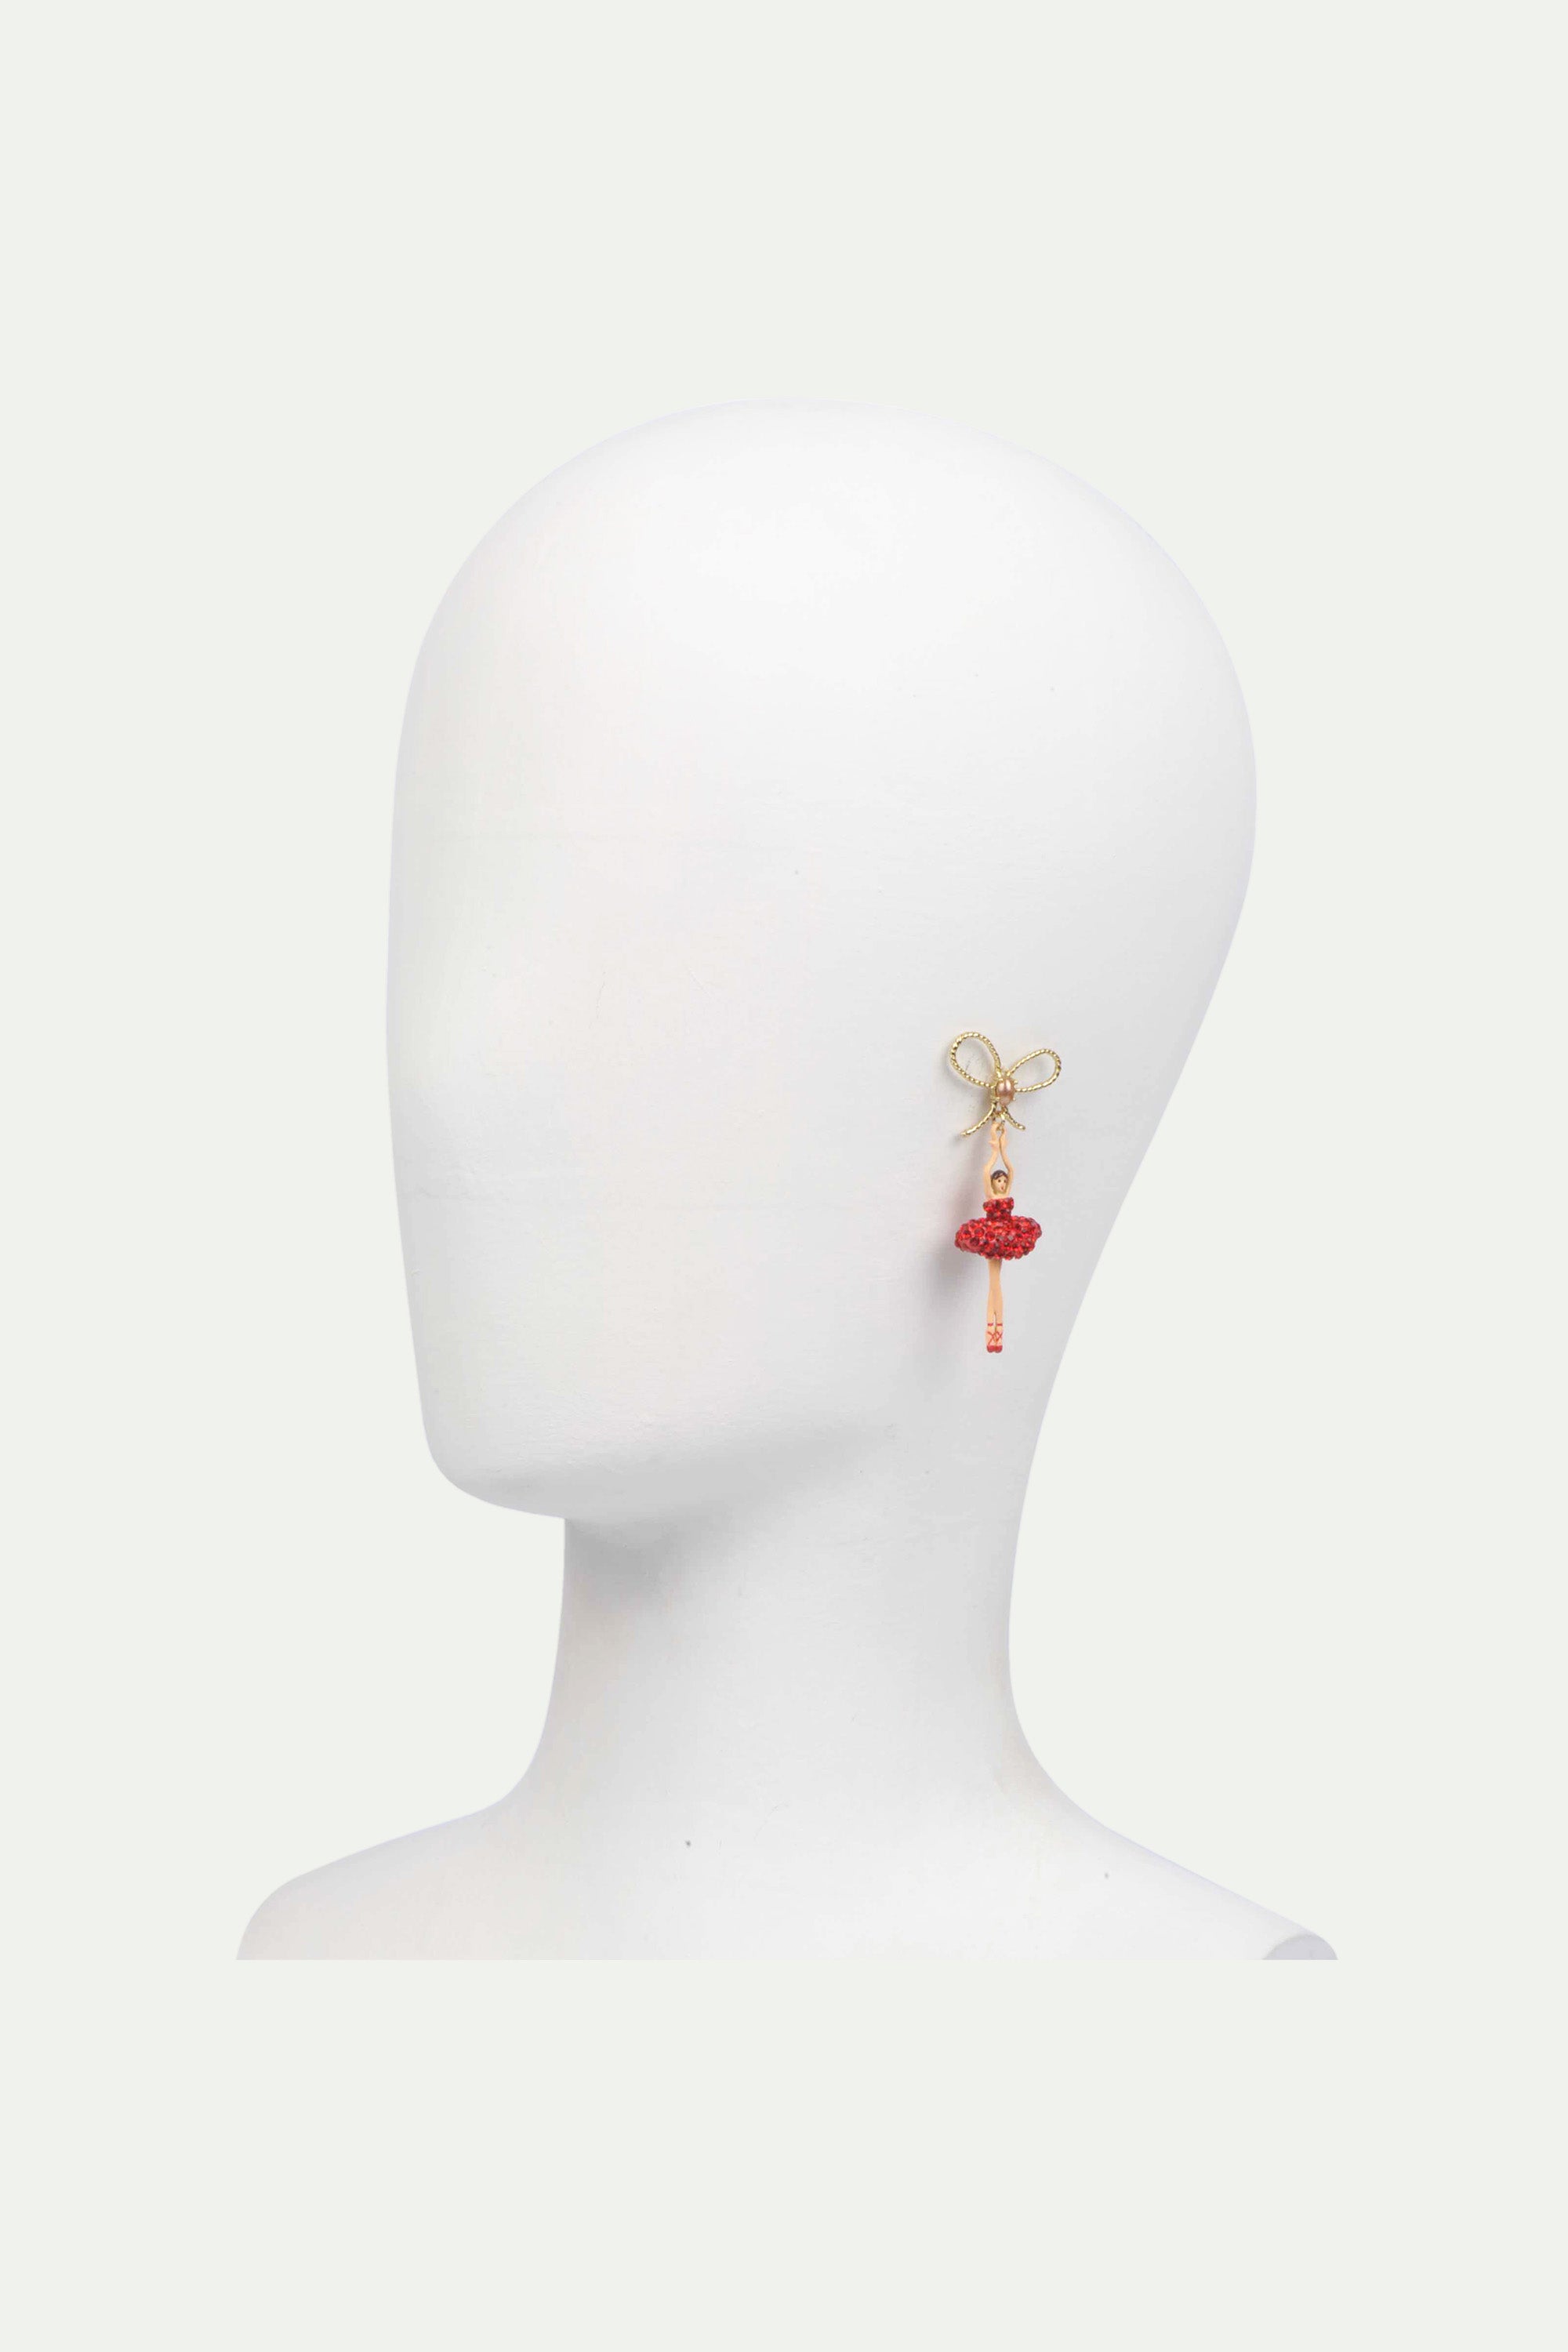 Asymmetrical Clip on earrings ballerina with tutu paved with red rhinestones